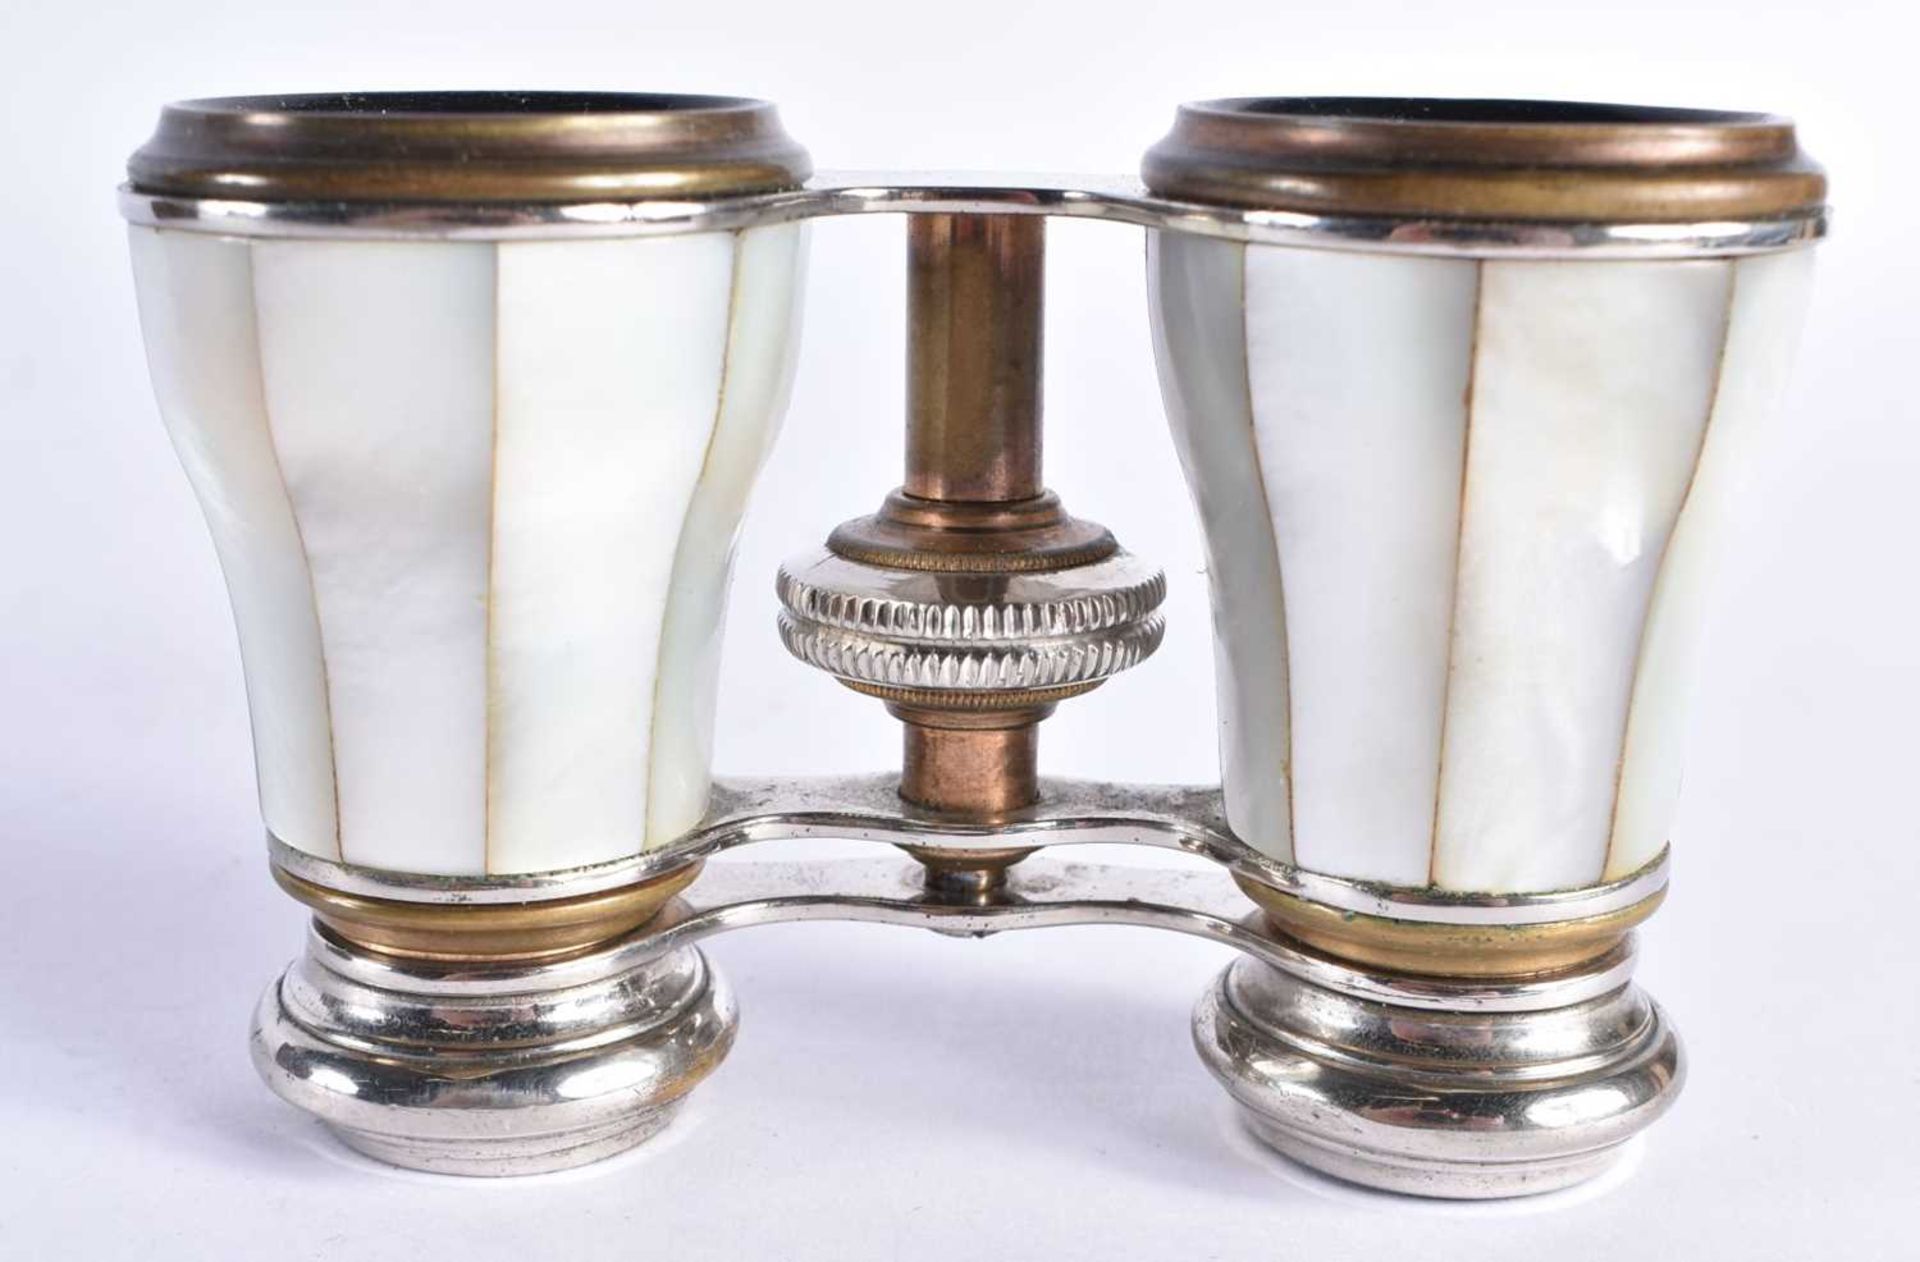 A CASED PAIR OF MOTHER OF PEARL OPERA GLASSES 9 x 10cm extended - Image 3 of 6